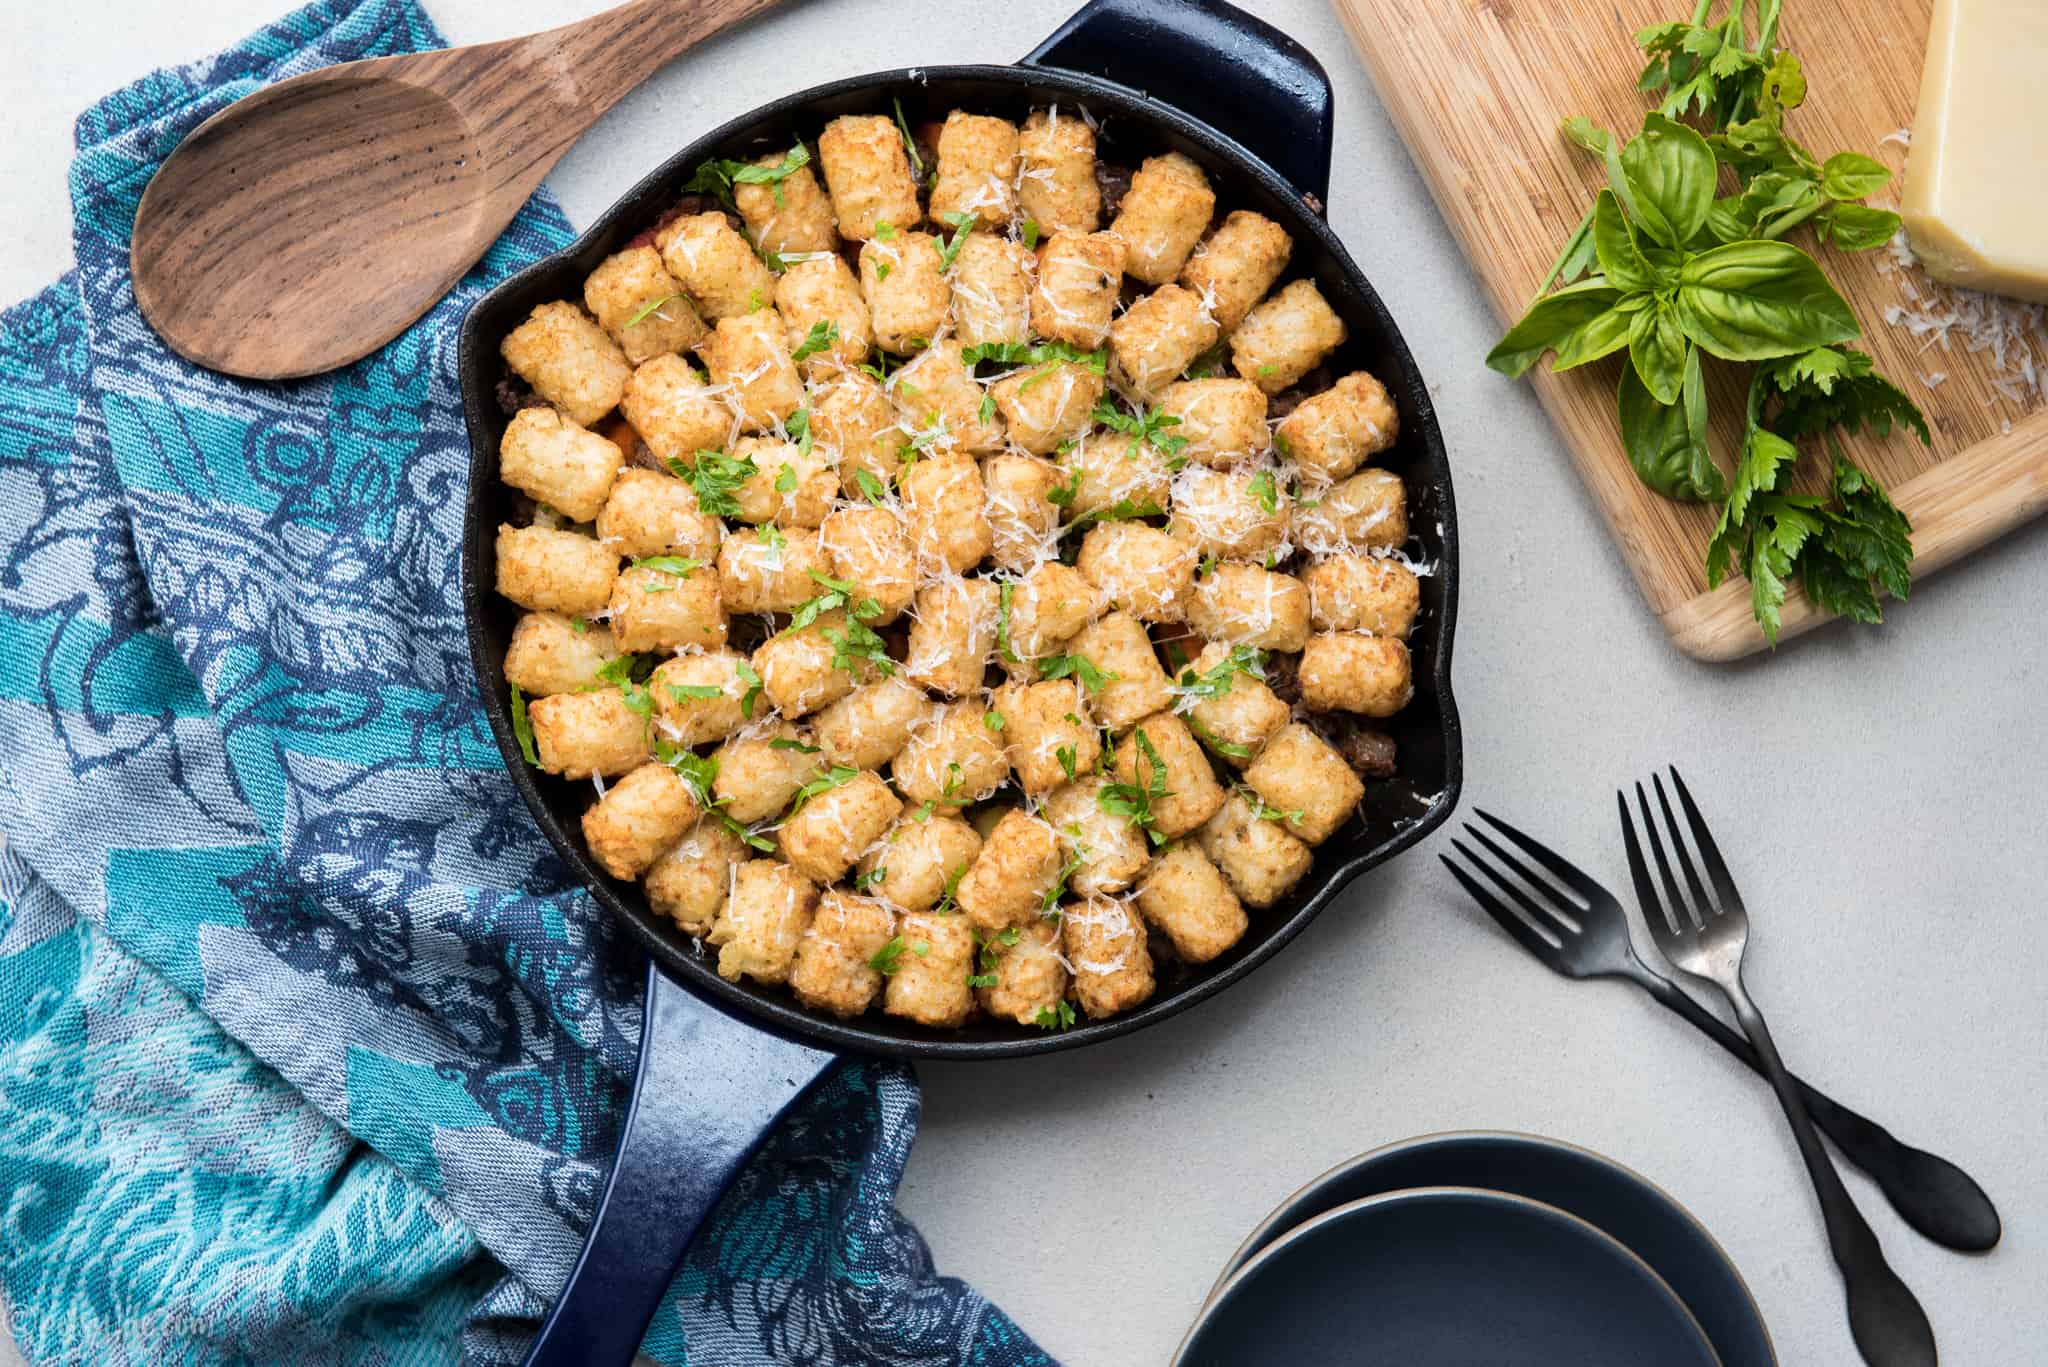 Skillet casserole topped with tater tots next to plates, forks and a cutting board with cheese and herbs